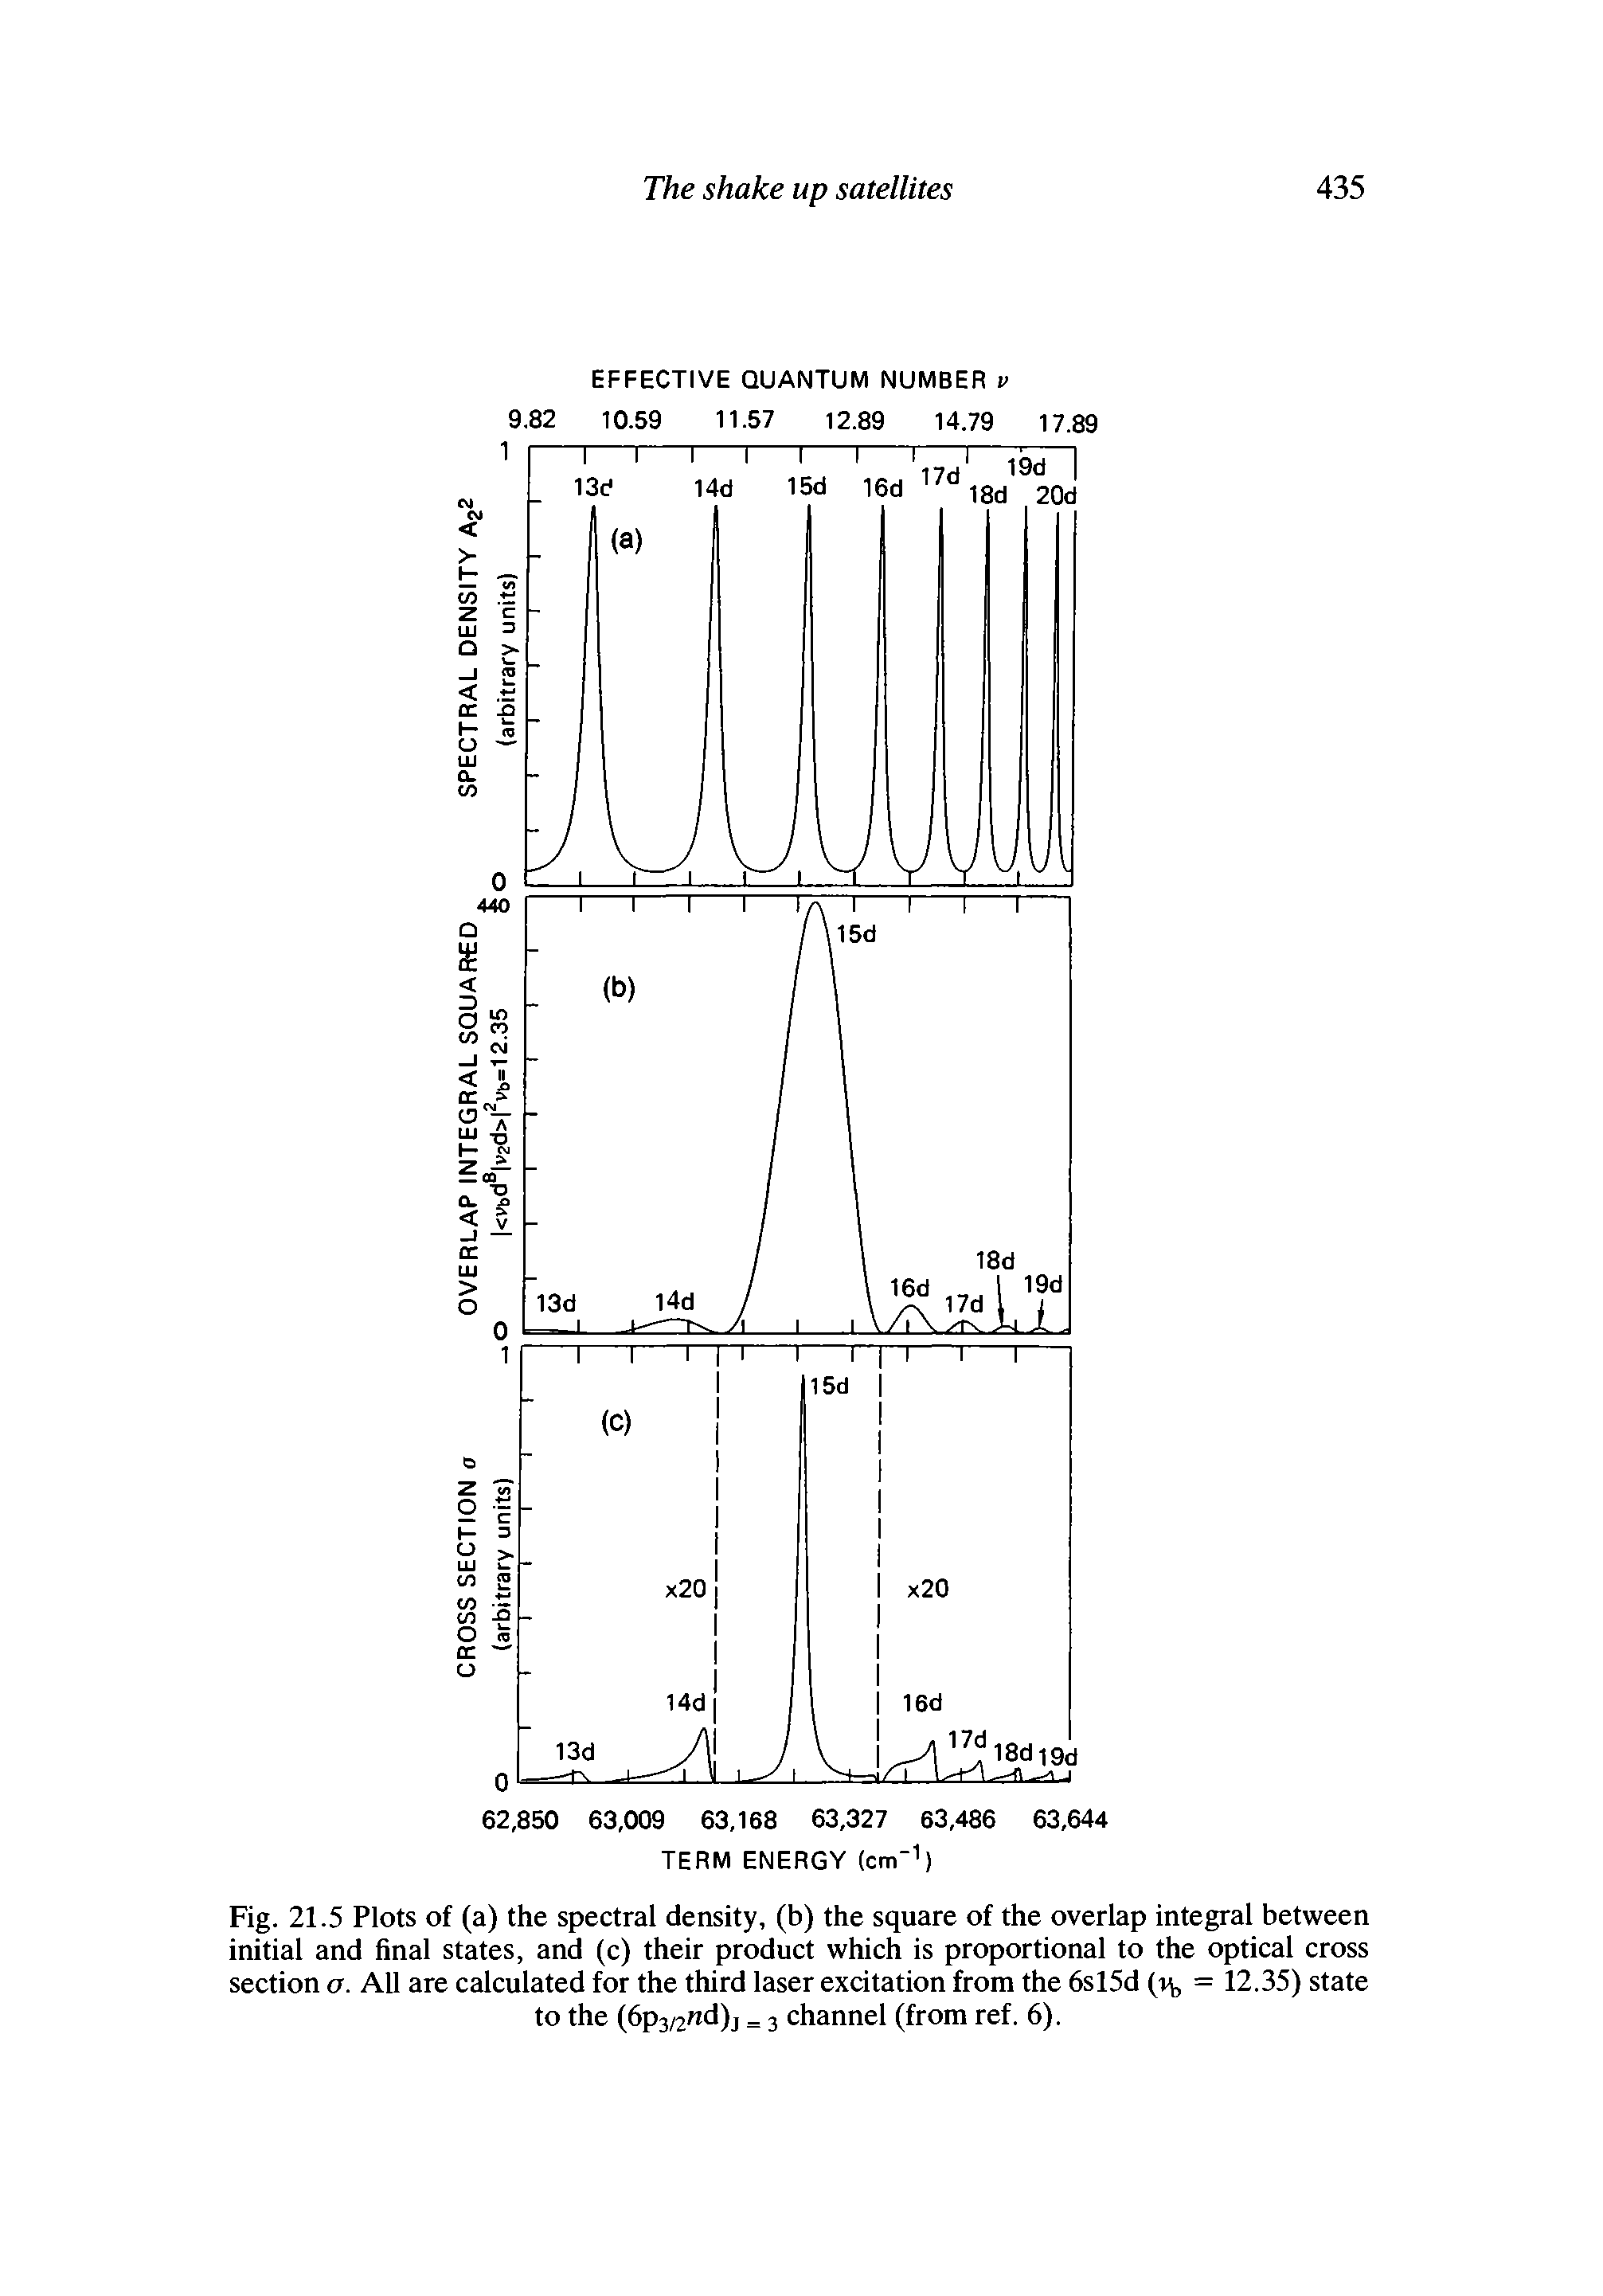 Fig. 21.5 Plots of (a) the spectral density, (b) the square of the overlap integral between initial and final states, and (c) their product which is proportional to the optical cross section a. All are calculated for the third laser excitation from the 6sl5d (q, = 12.35) state to the (6p3/2nd)j = 3 channel (from ref. 6).